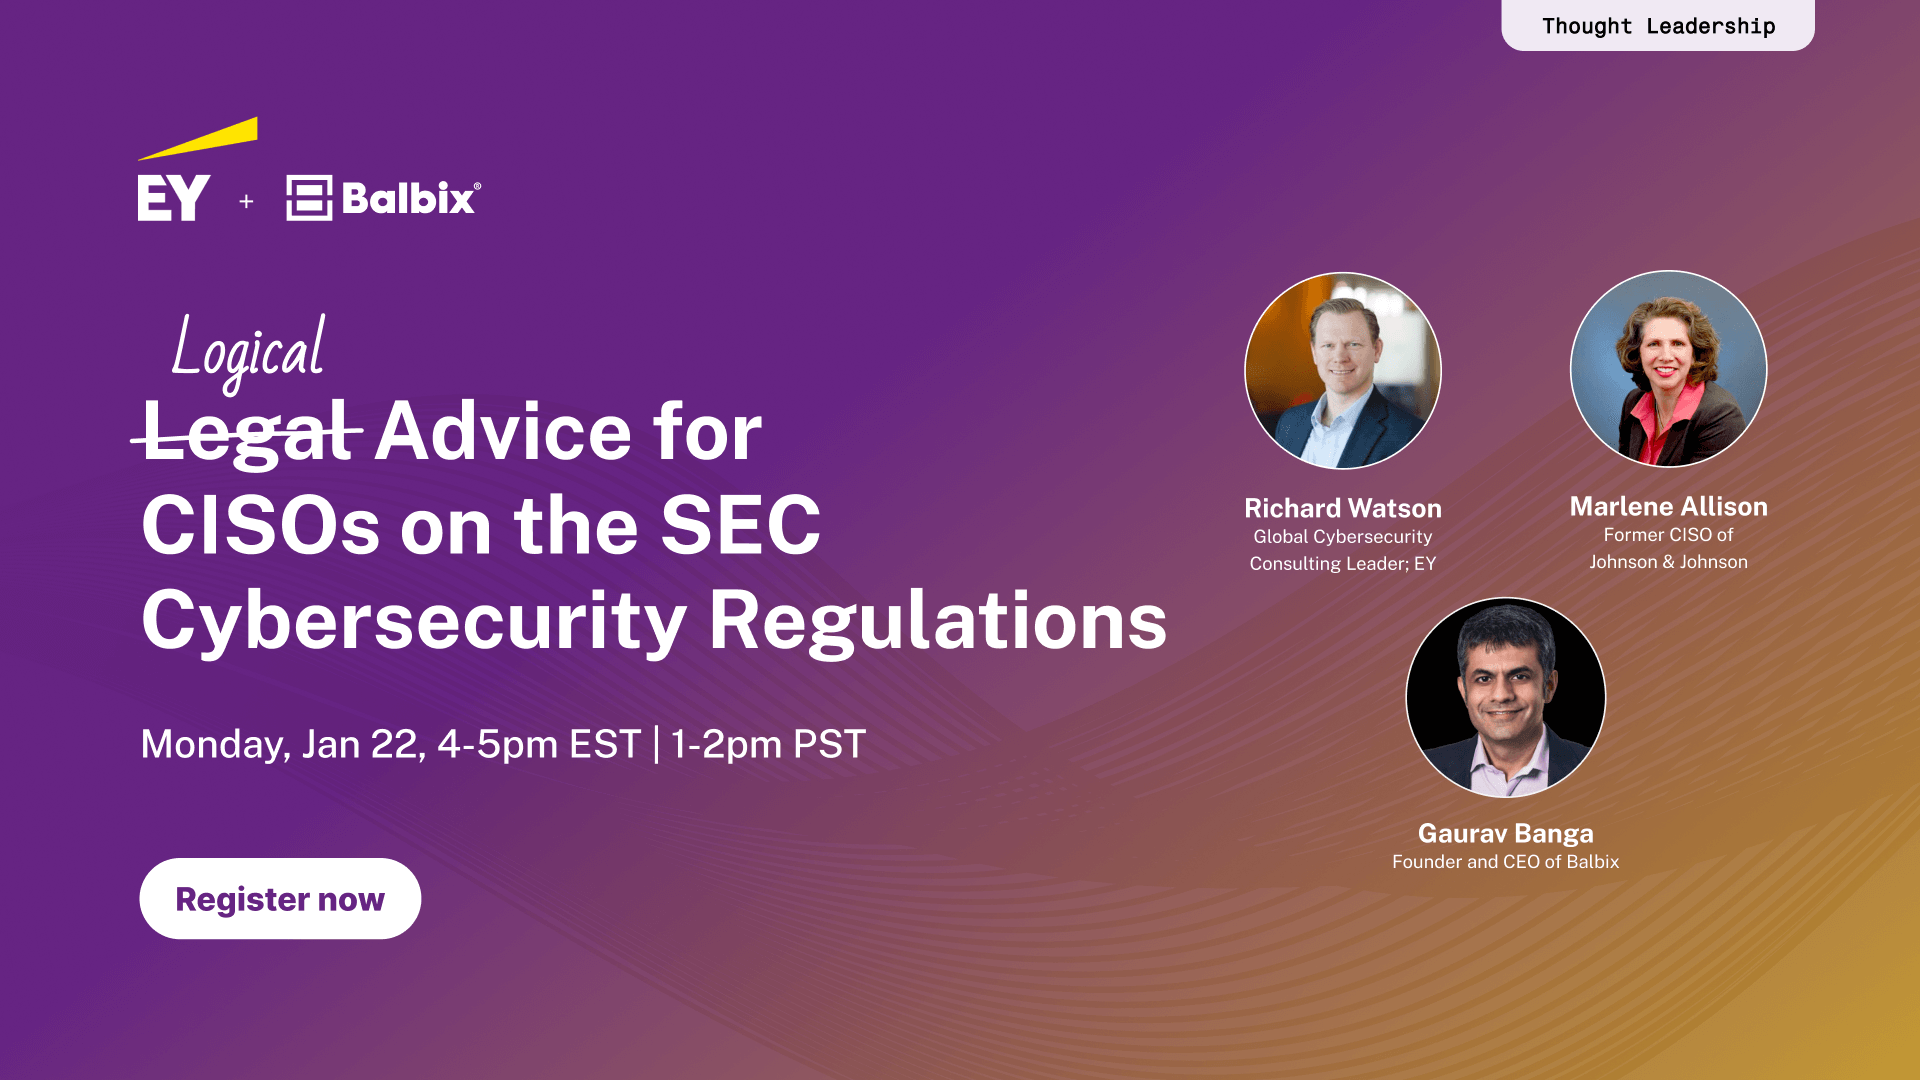 Legal Logical Advice for CISOs on the SEC Cybersecurity Regulations